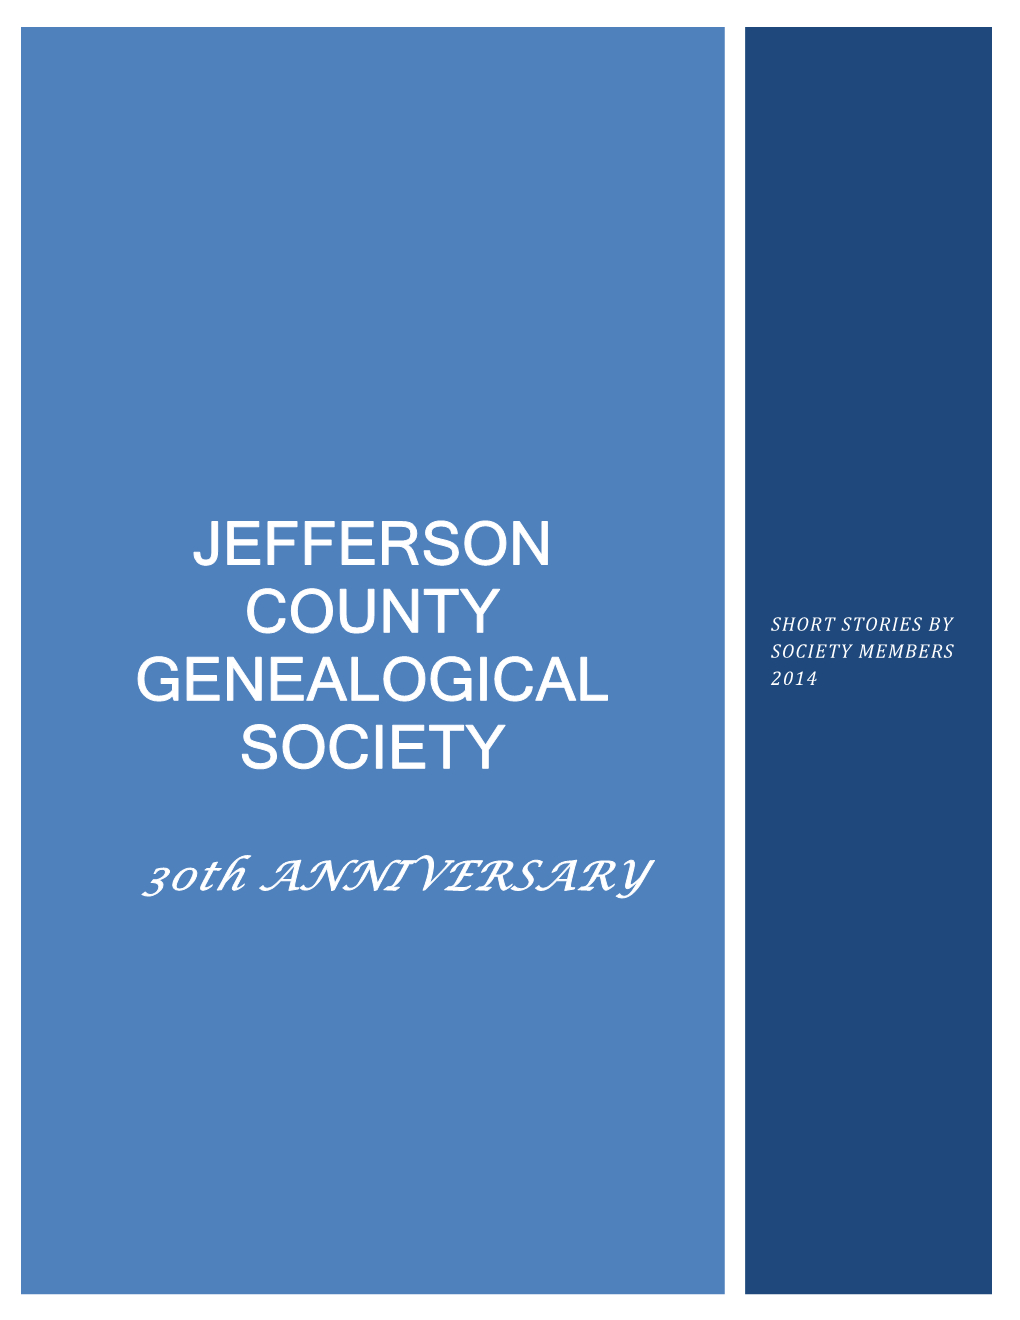 30Th Anniversary Anthology of 24 Family History Stories